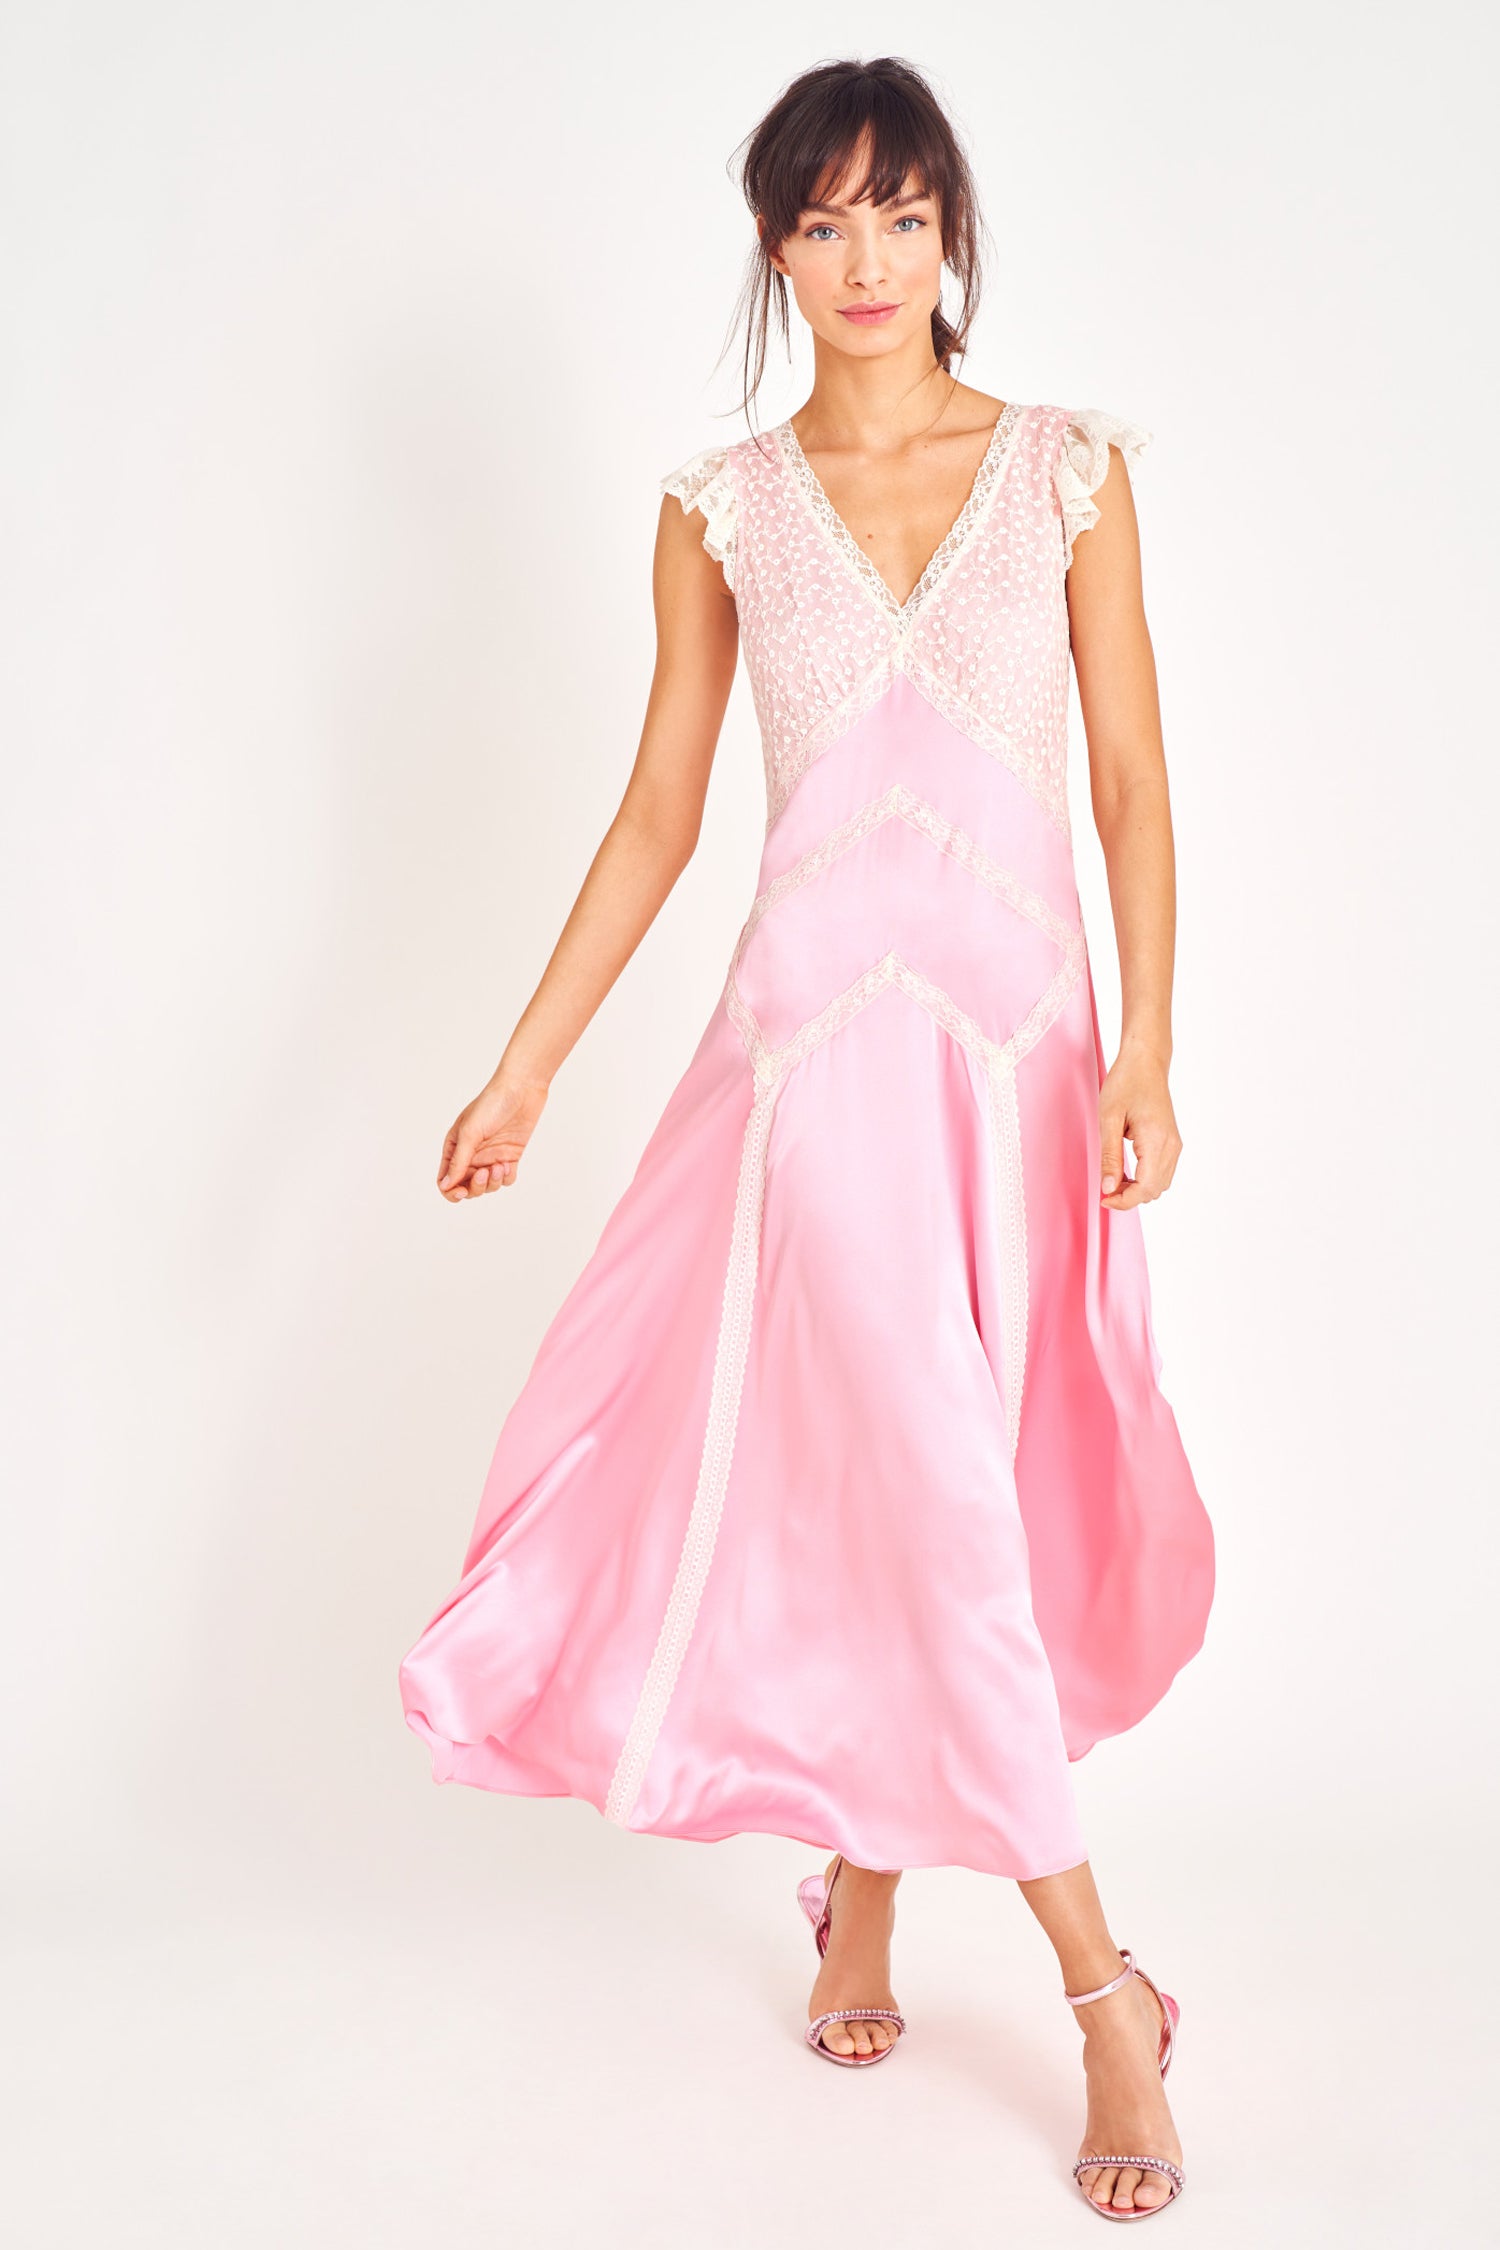 Pink silk v neck maxi dress with lace, embroidery, tulle insets.